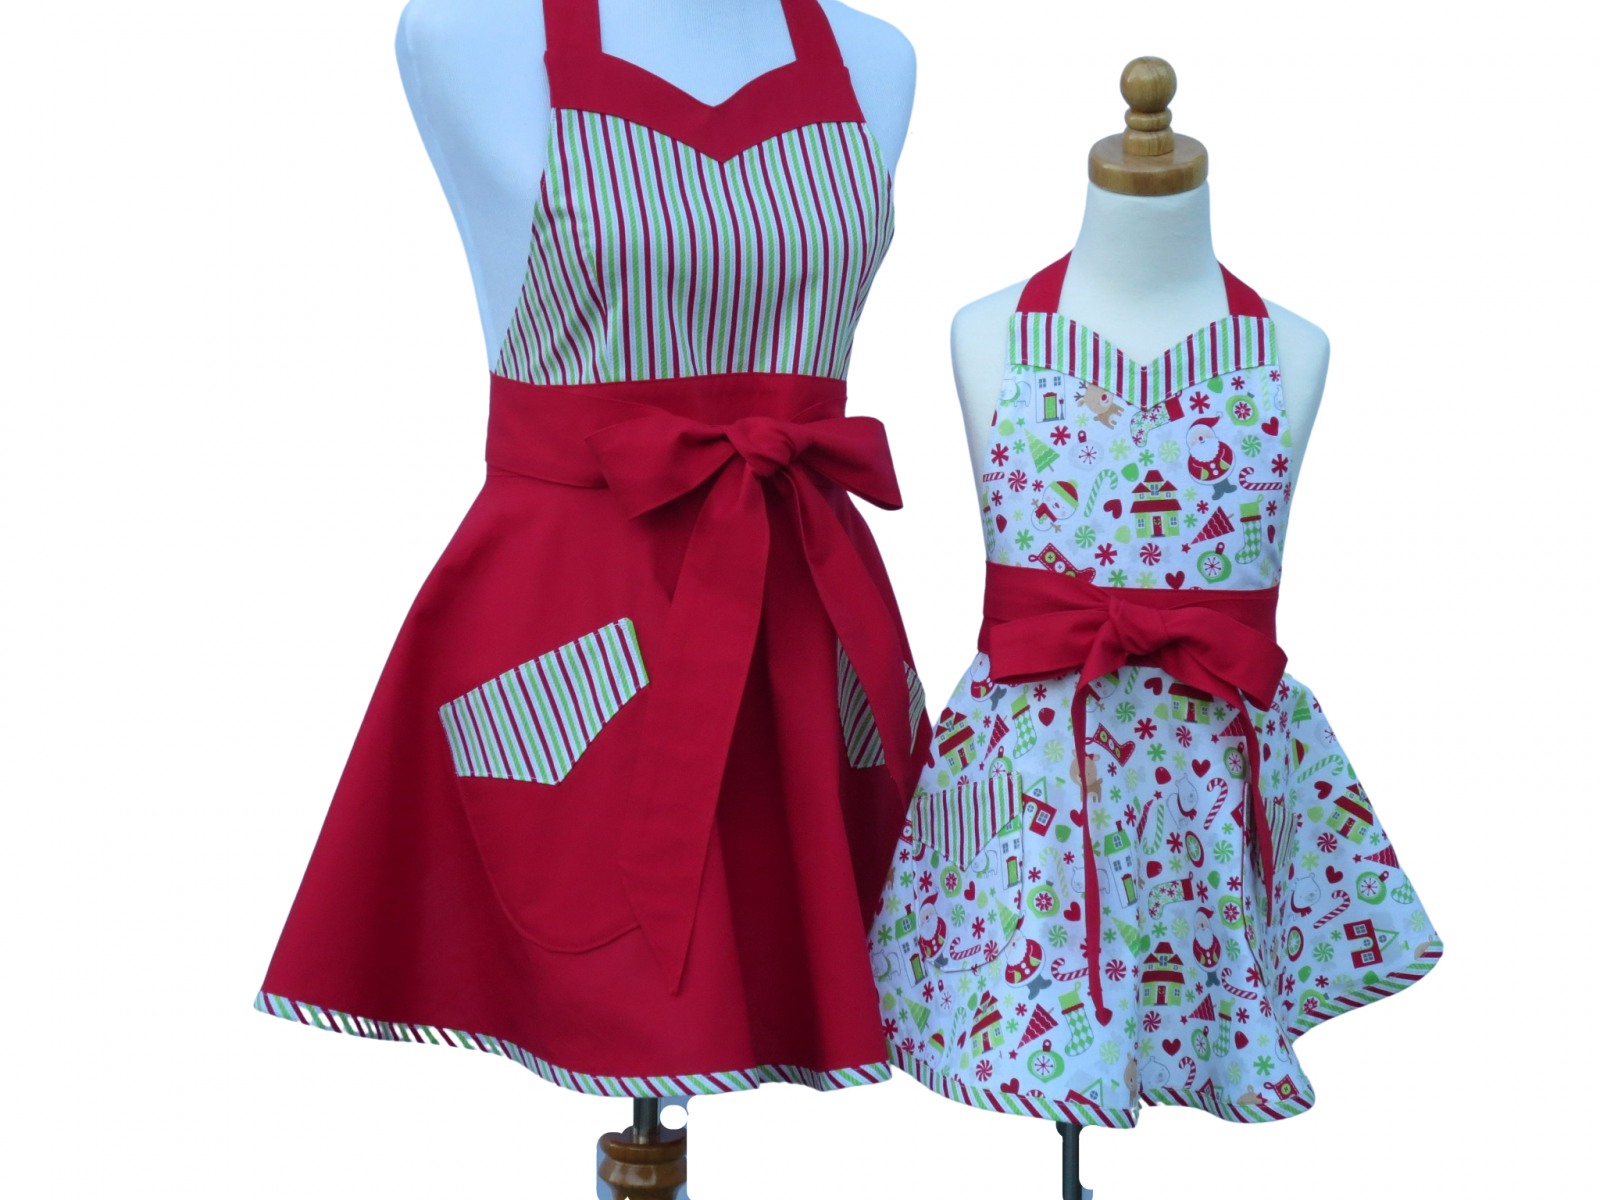 https://www.stitchedbybeverly.com/sites/stitchedbybeverly.indiemade.com/files/imagecache/im_clientsite_product_zoom/mother_daughter_christmas_holiday_retro_style_apron_set_front_views_tied_in_front.jpg